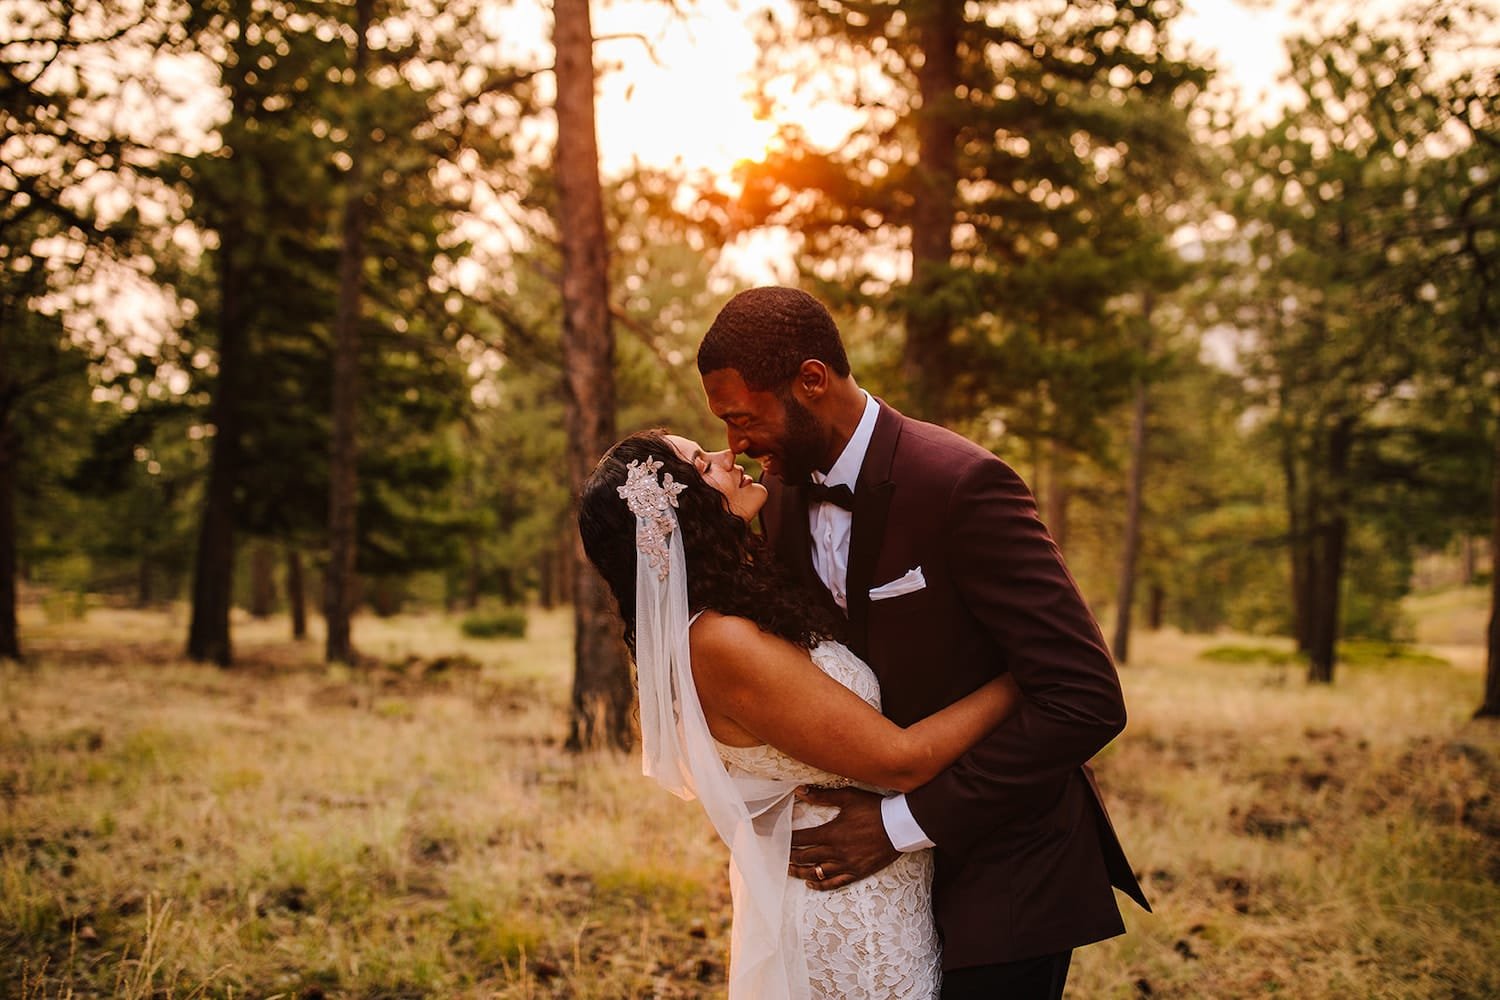 Why I Wish I Eloped  Married Couples Share Their Experiences